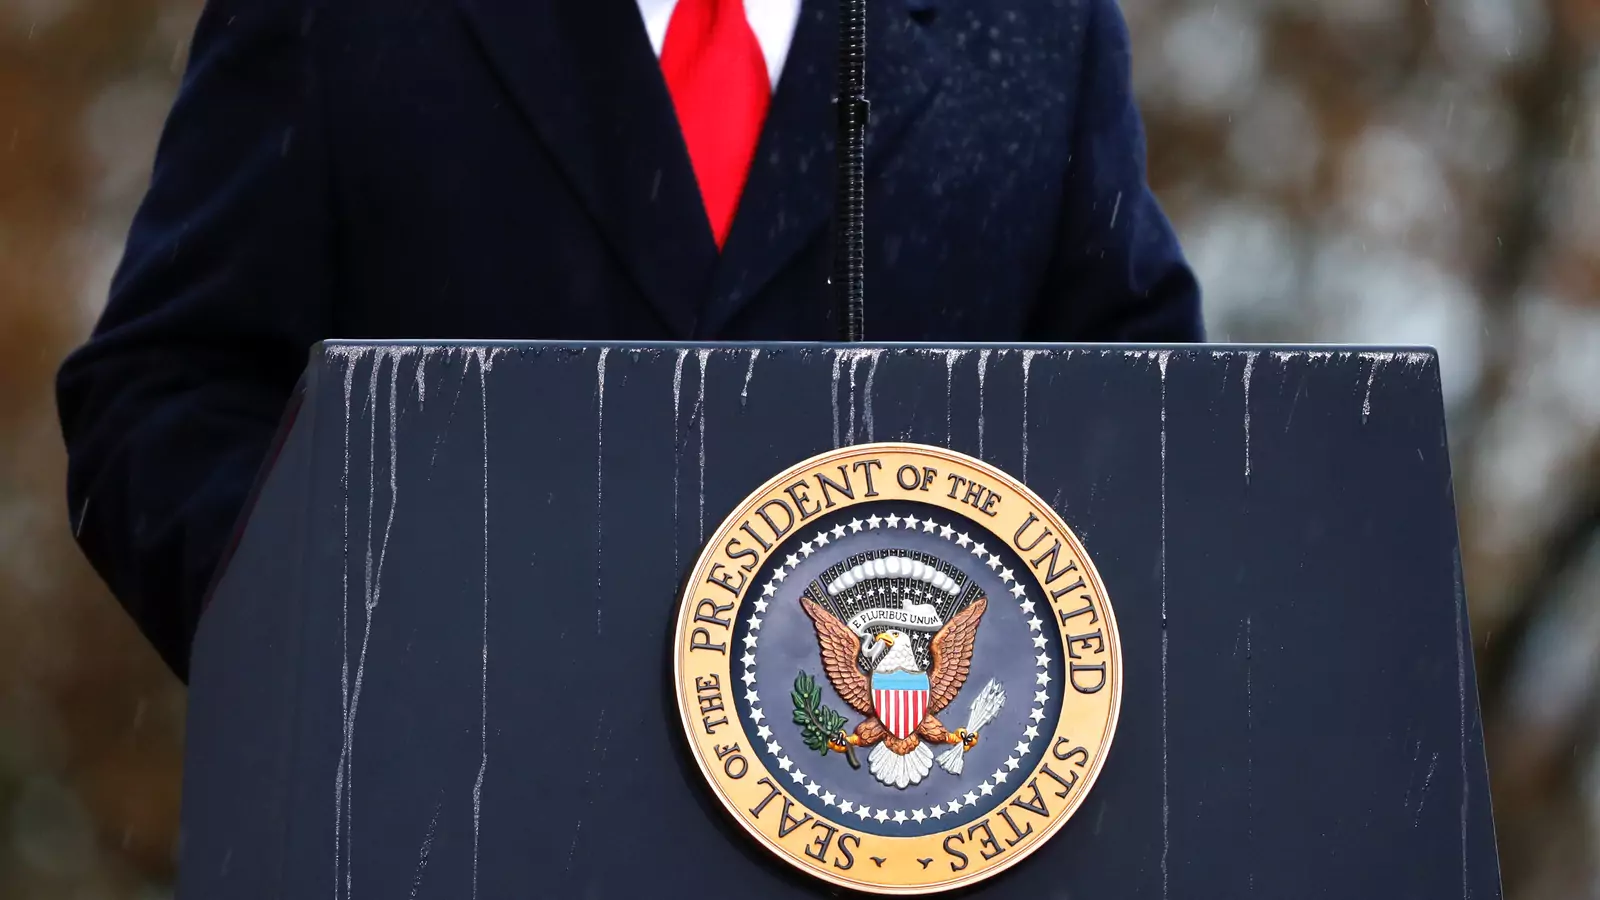 A lectern with presidential seal is pictured as U.S. President Donald Trump speaks.